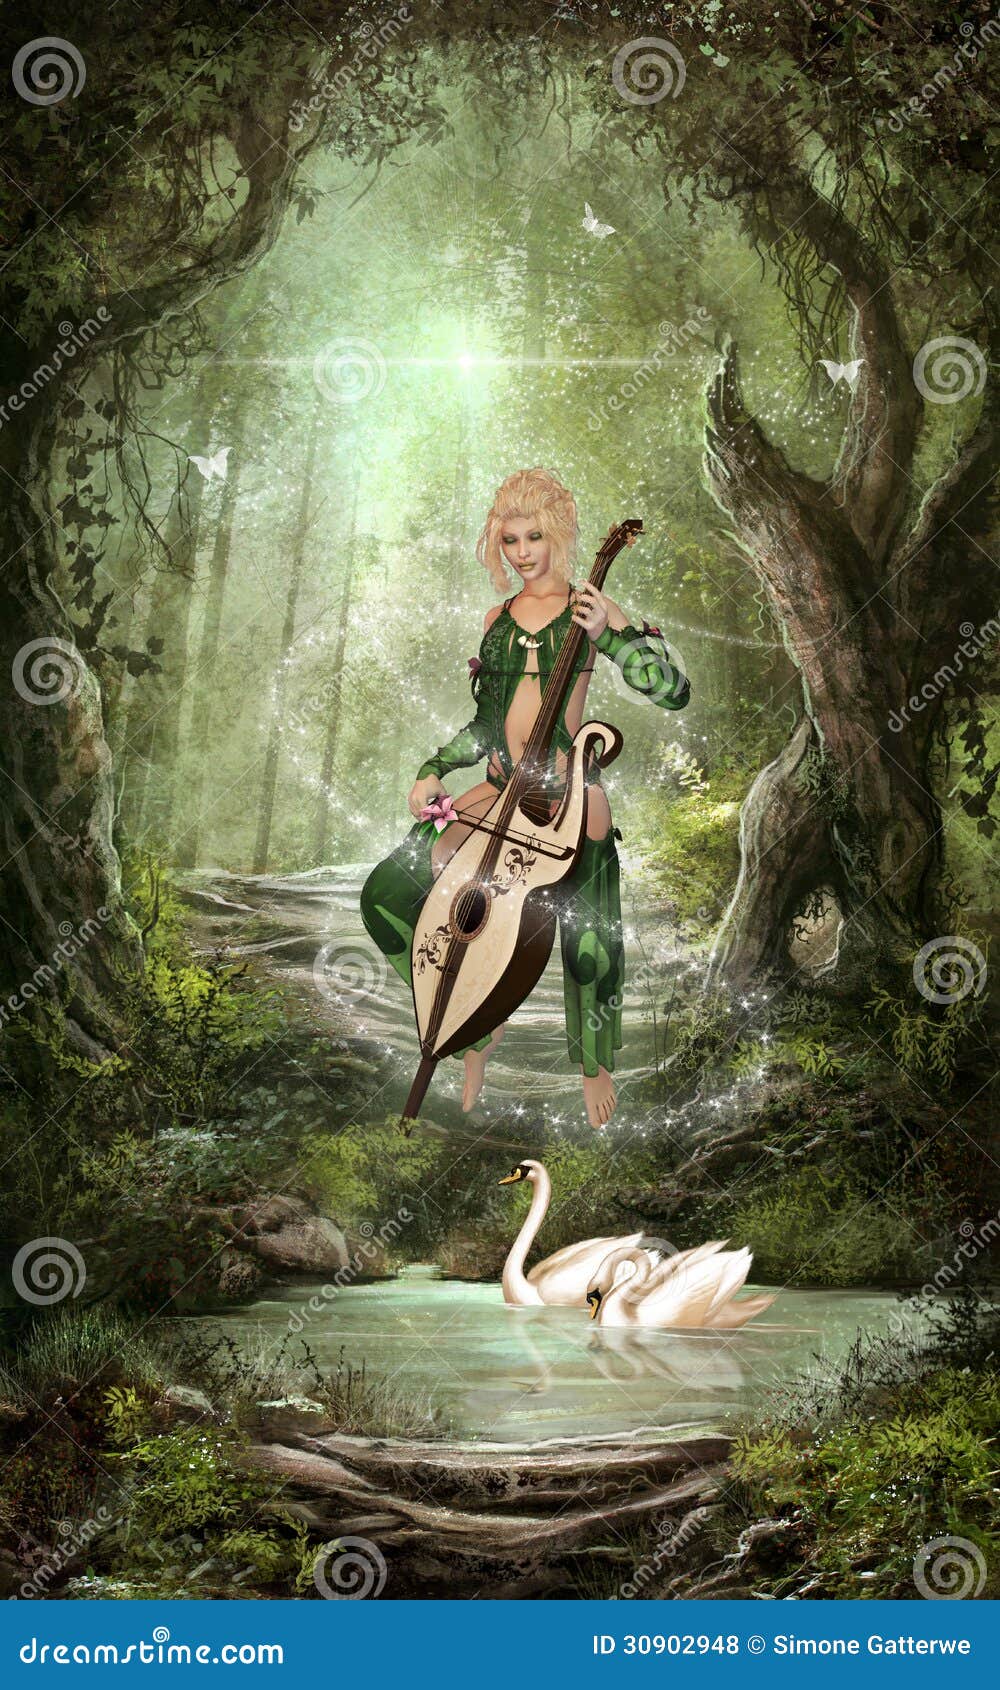 The Elven Forest Royalty Free Stock Photos - Image: 30902948